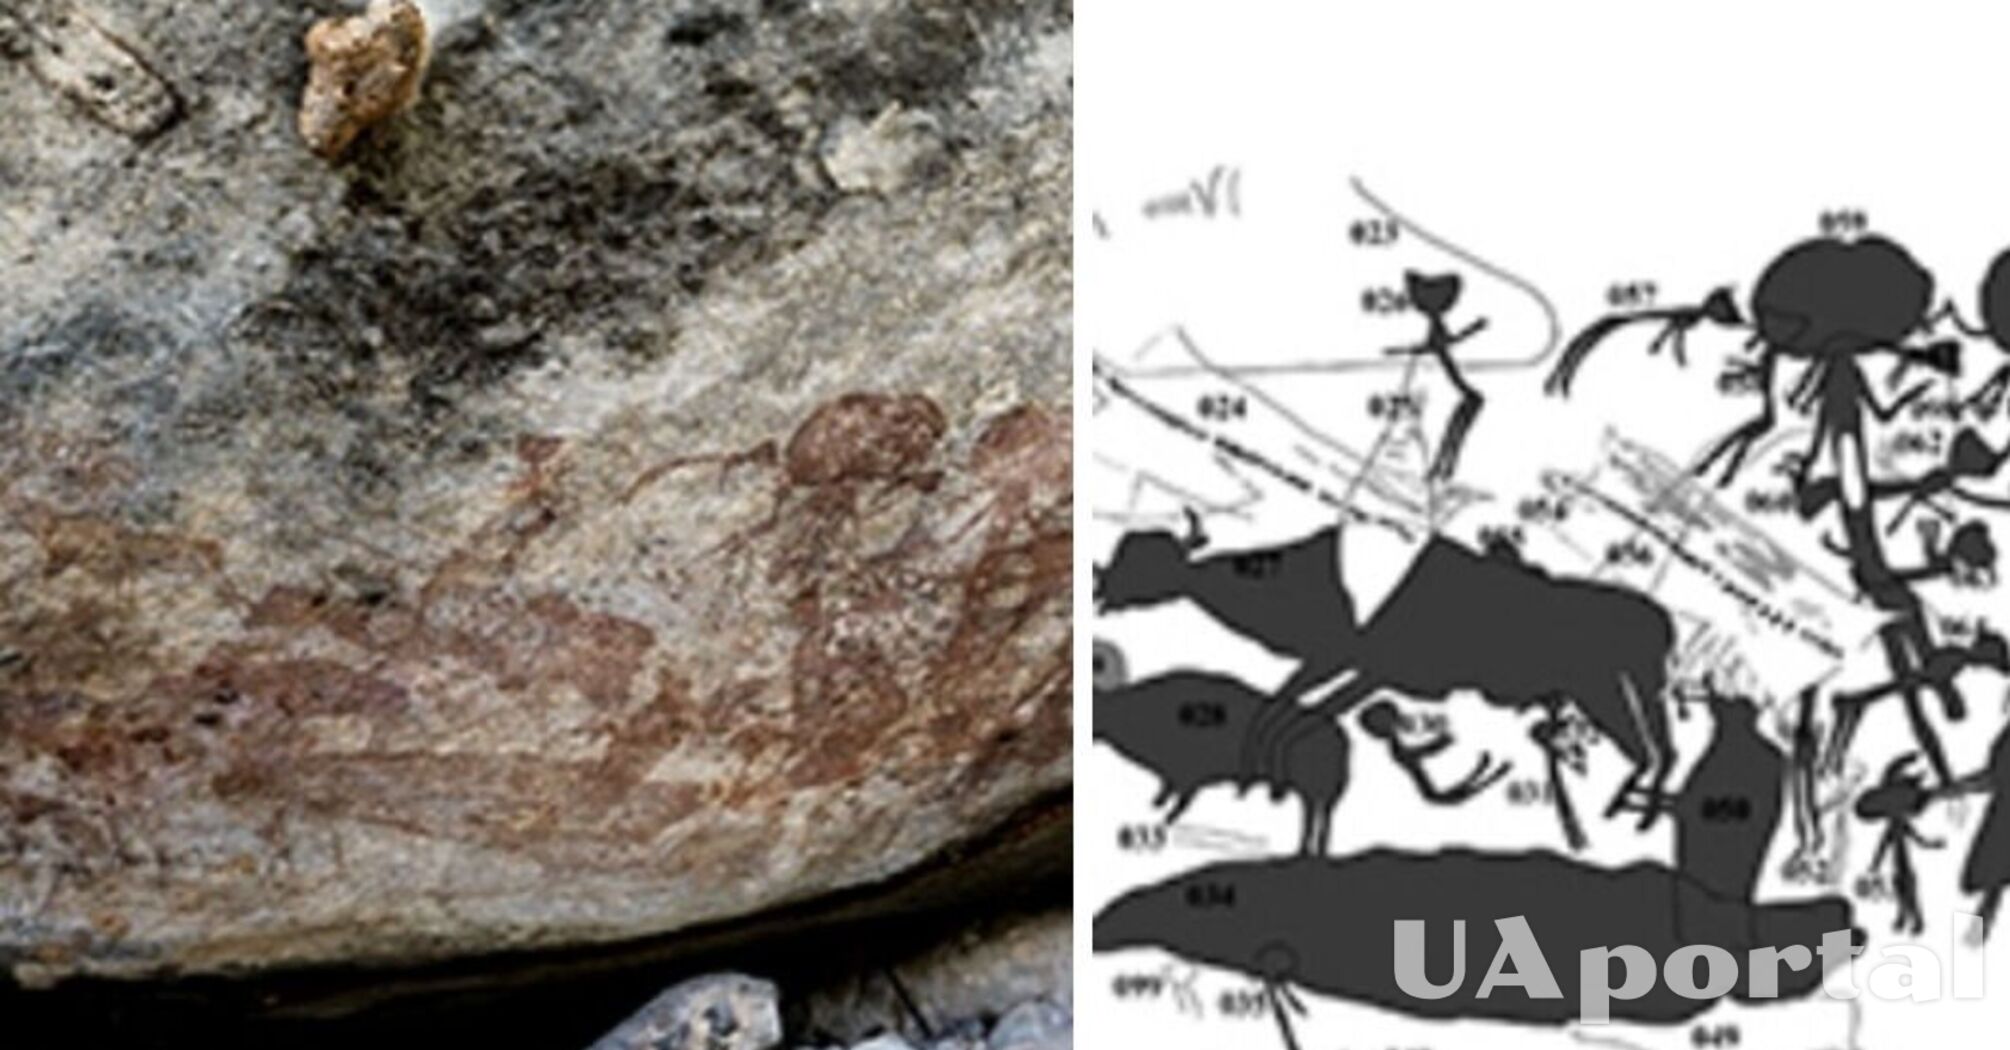 Rock paintings with images of creepy creatures 40 thousand years old discovered in Tanzania